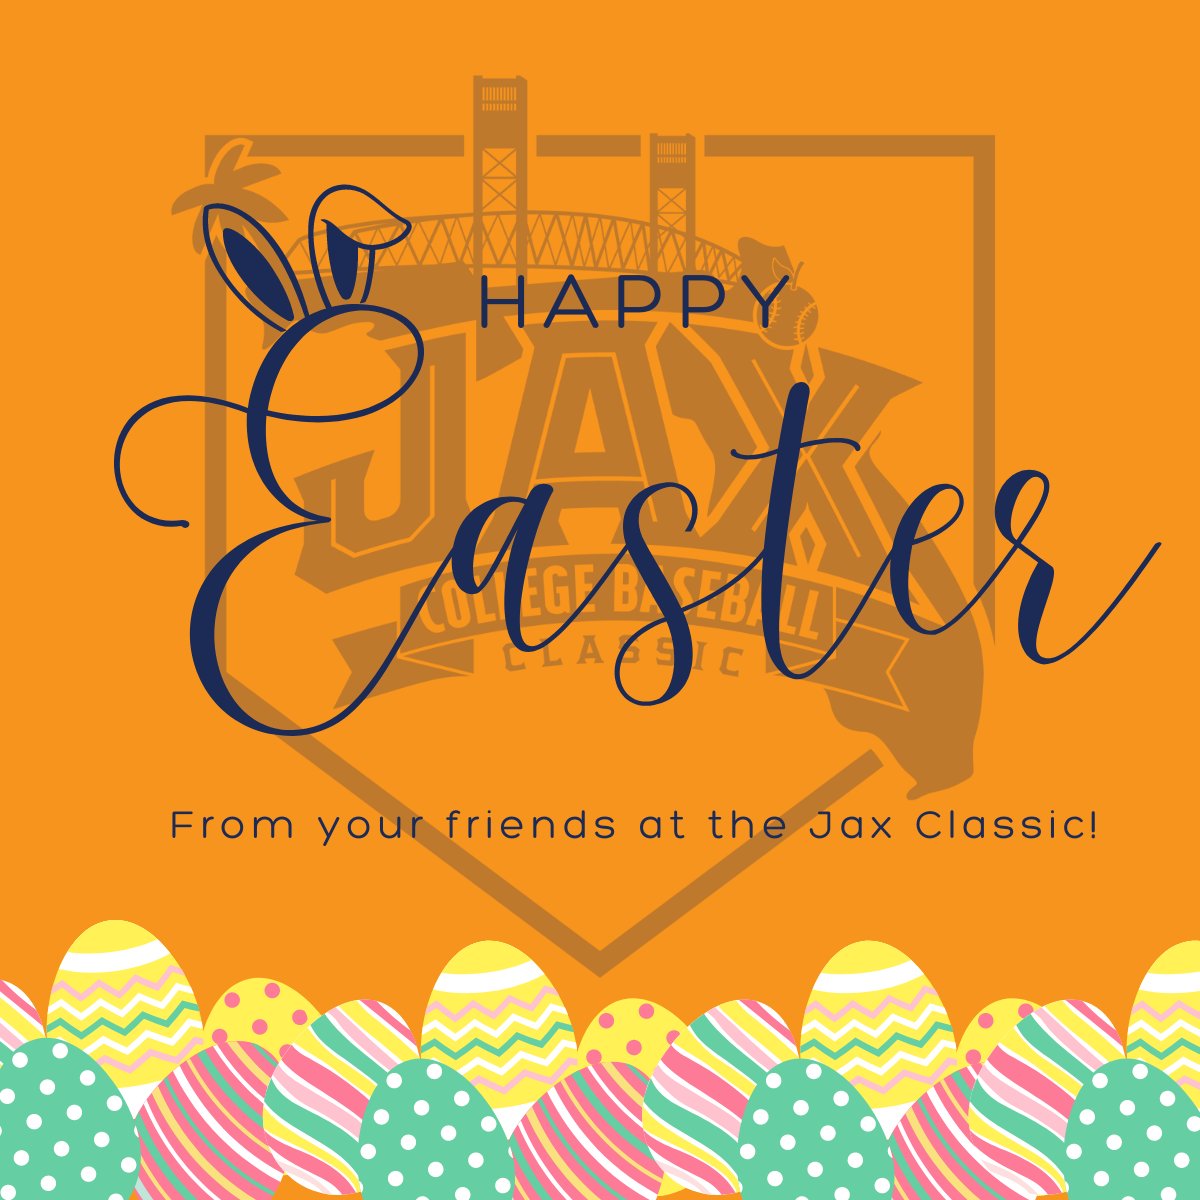 We hope y'all have a VERY Happy Easter!!🧡🐇 #BestOutsideOfOmaha